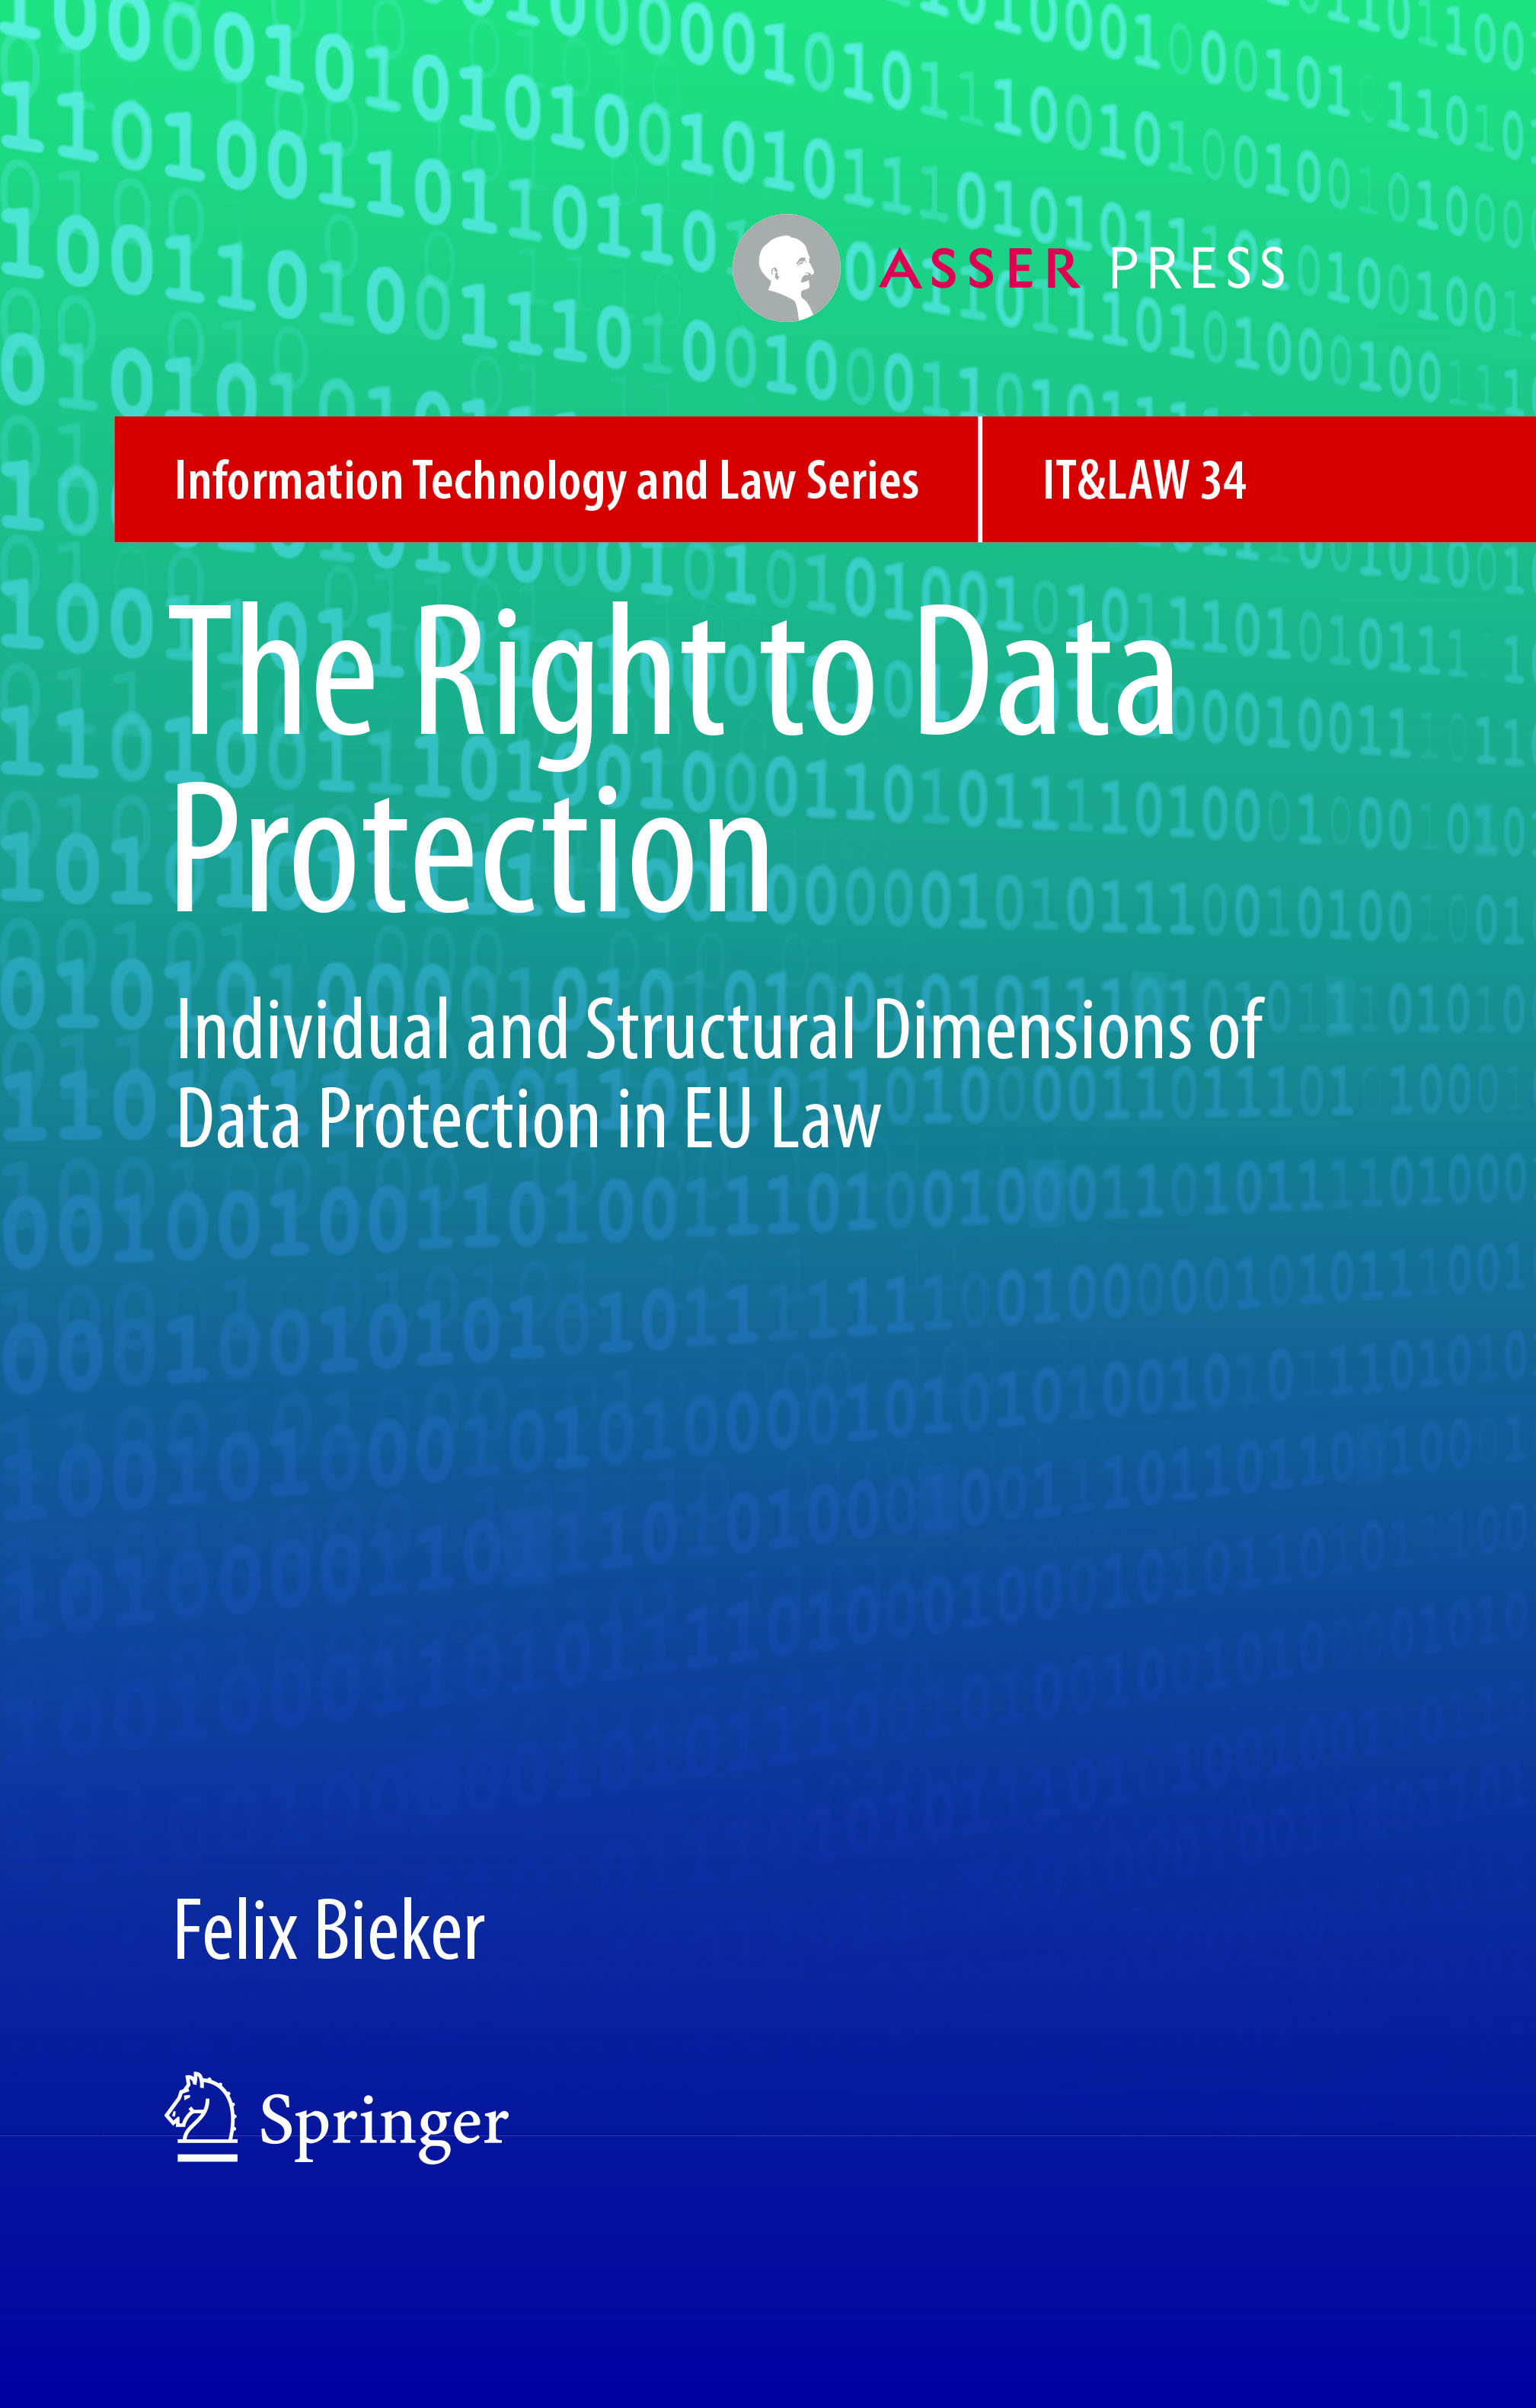 The Right to Data Protection - Individual and Structural Dimensions of Data Protection in EU Law